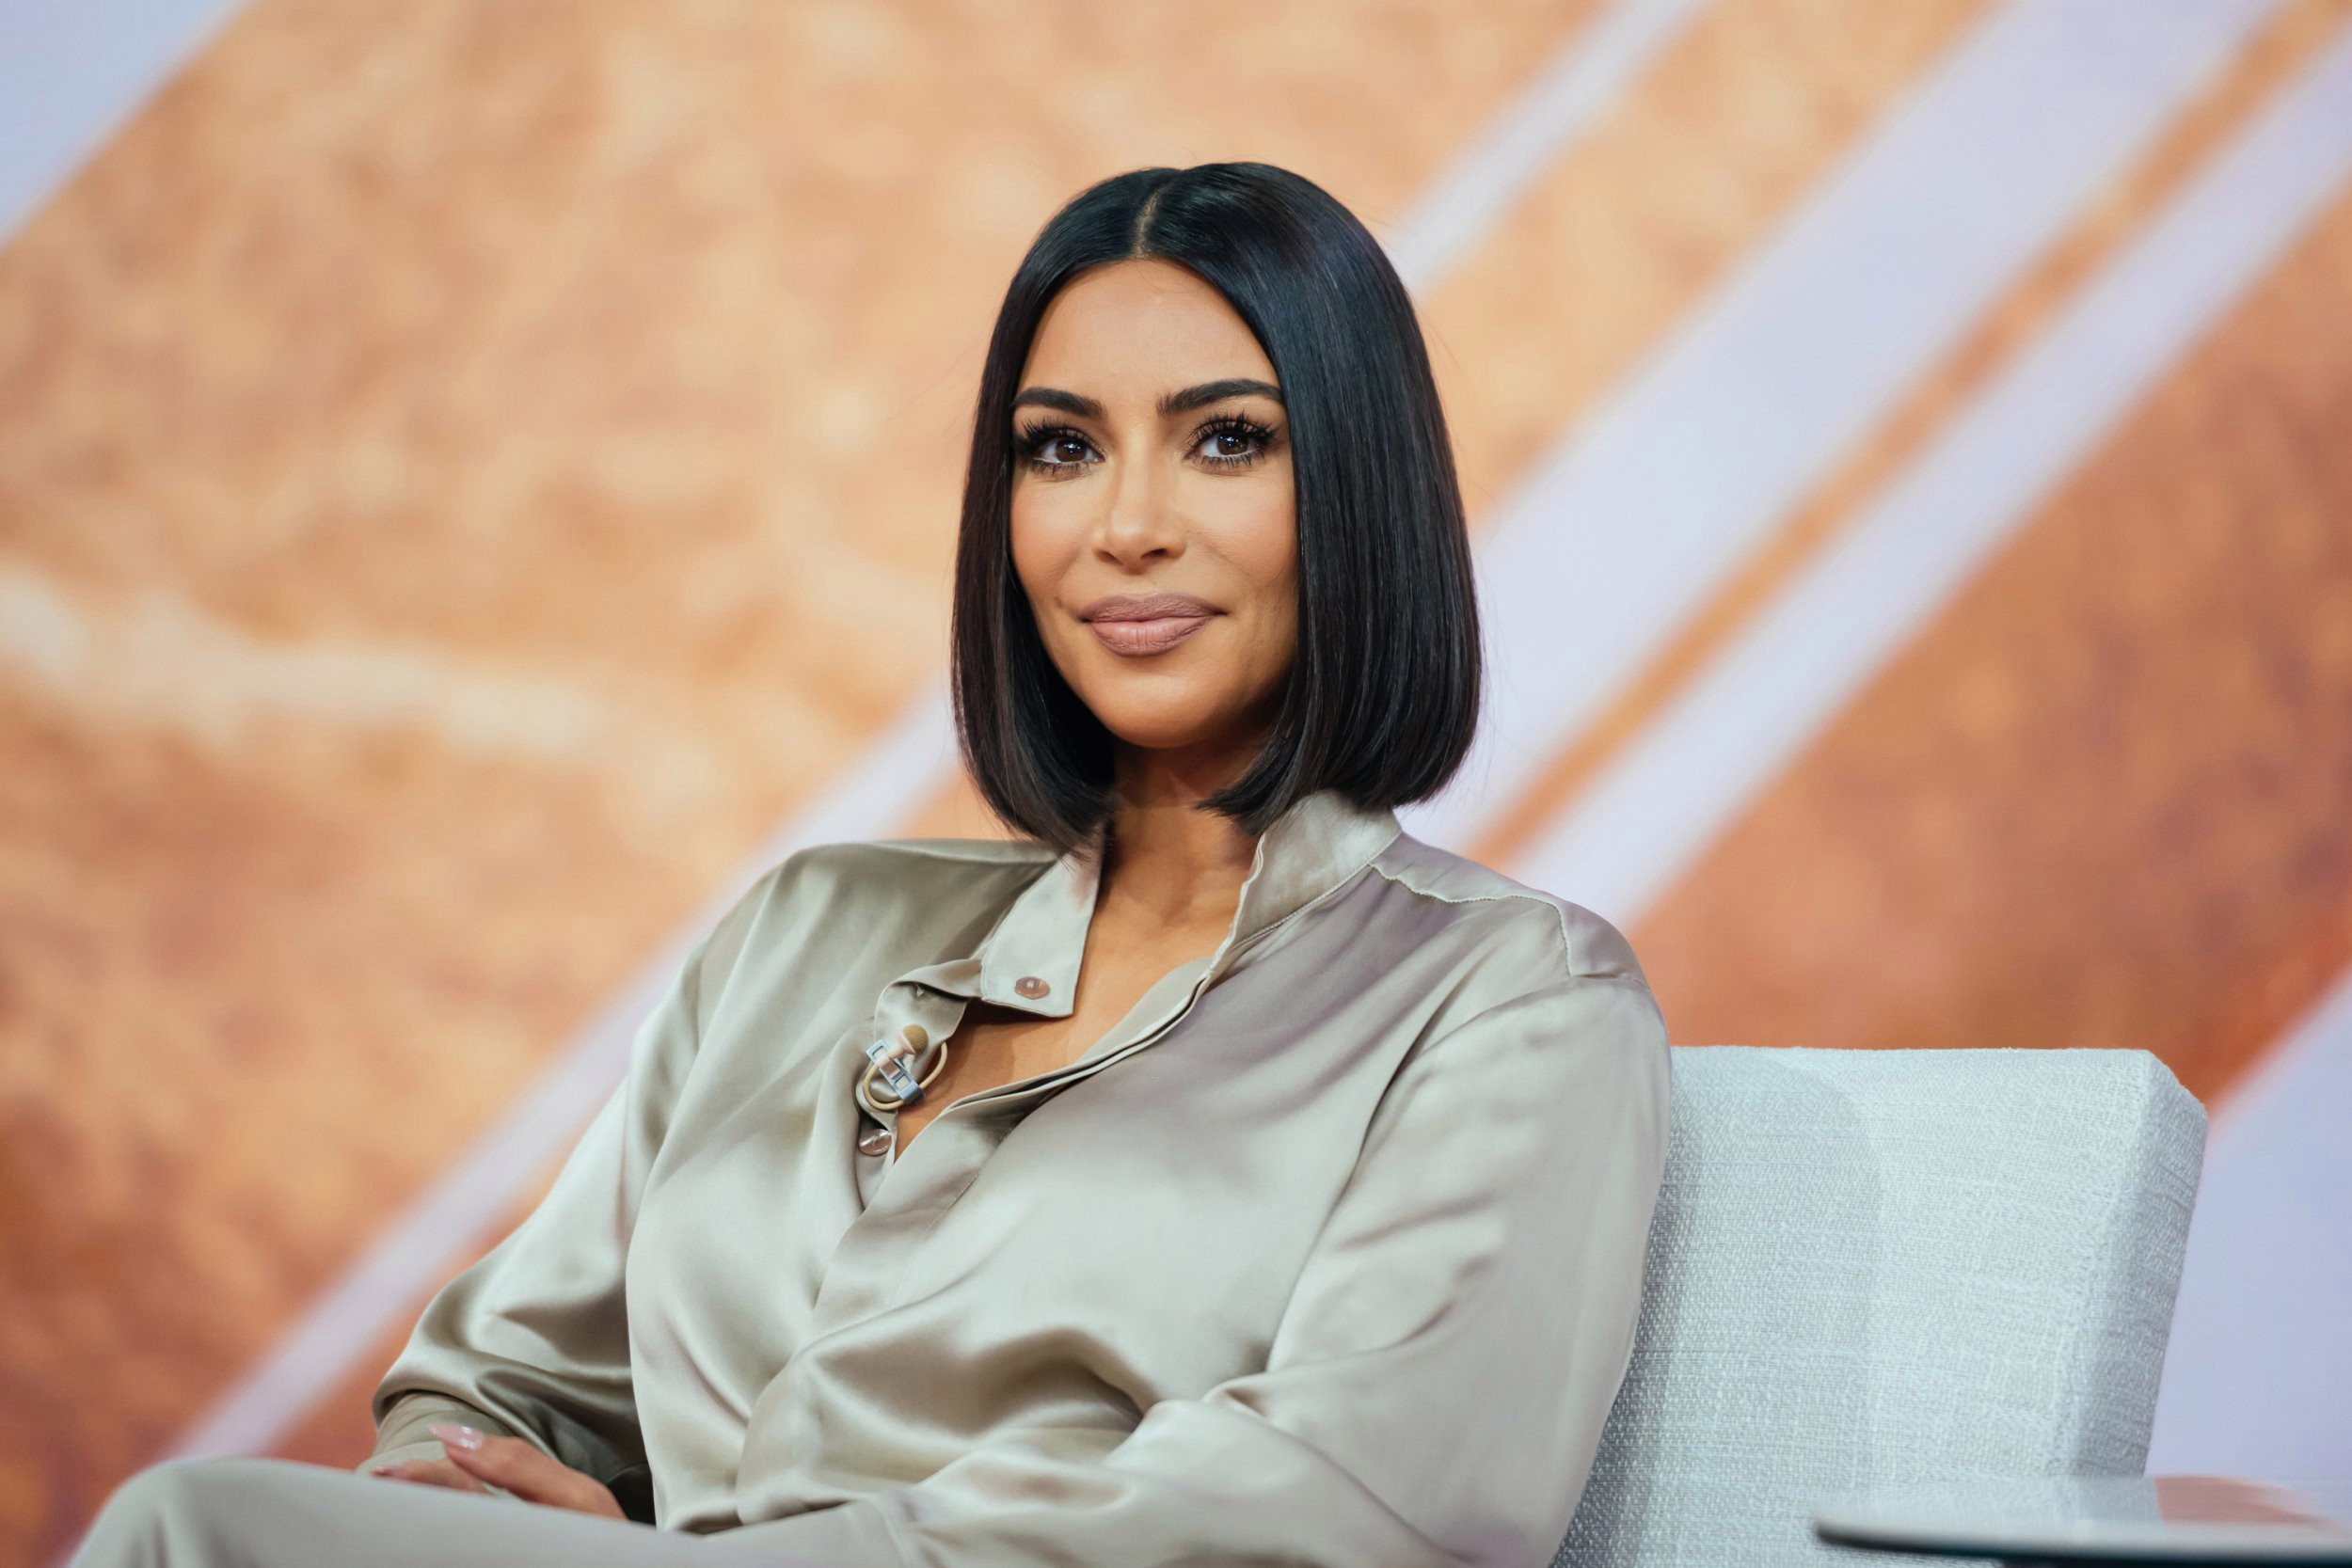 Kim Kardashian confusing hailstorm for snow is the best thing you’ll see today: ‘This is really crazy!’